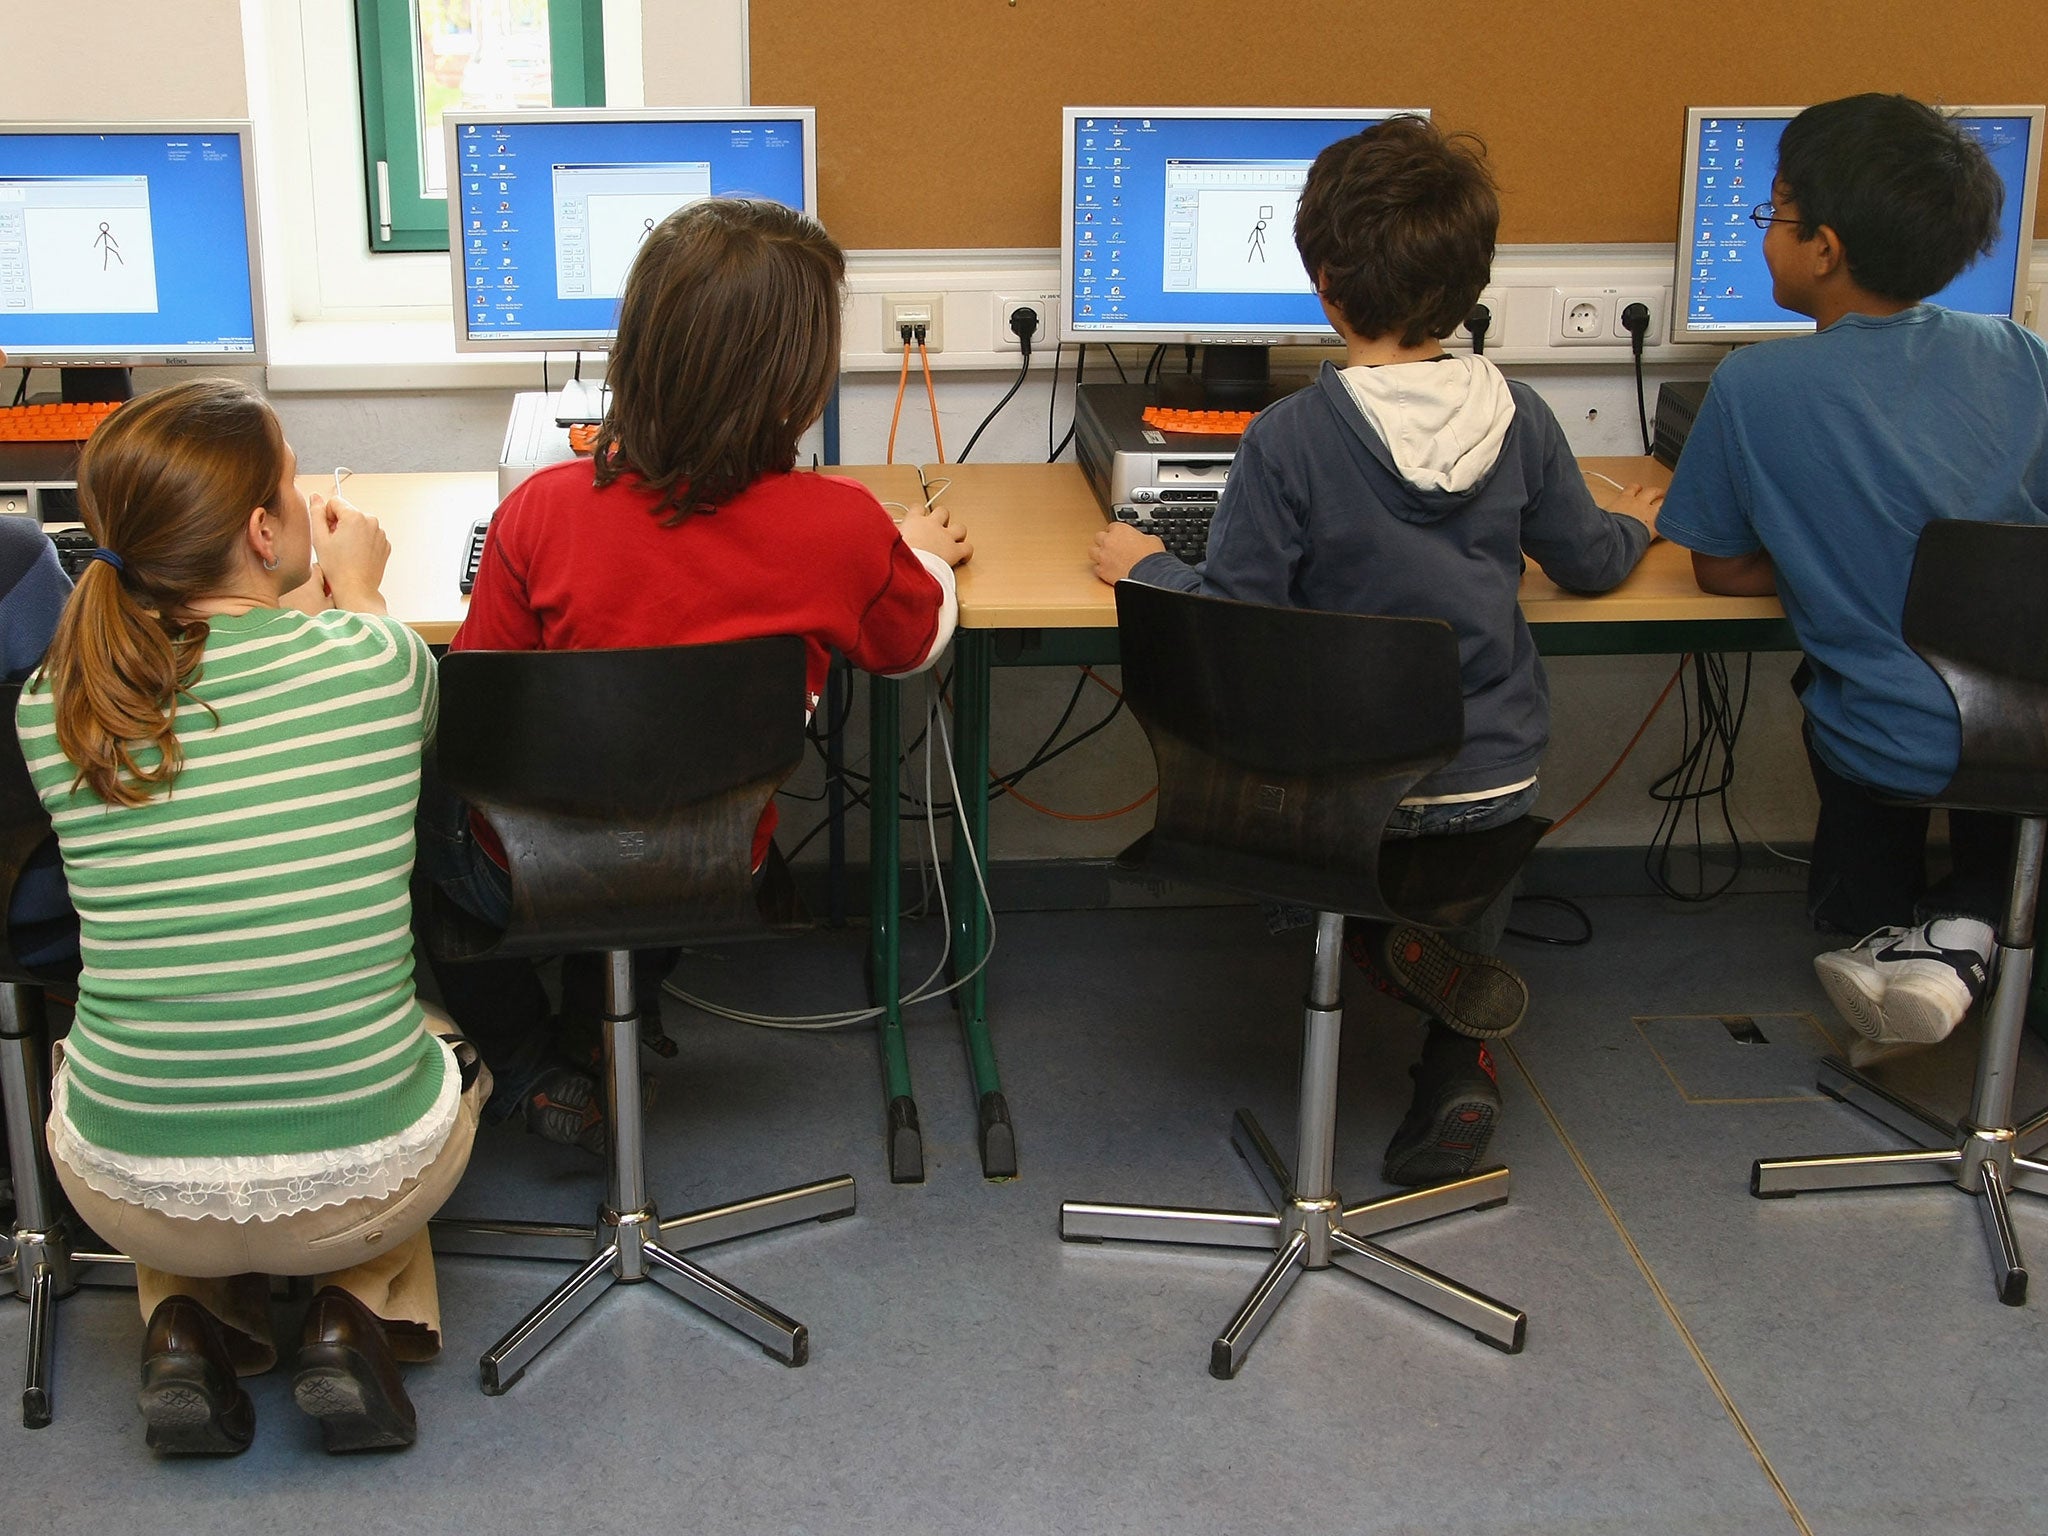 The new reforms have been introduced because of concern over the standard of computer technology teaching in the past